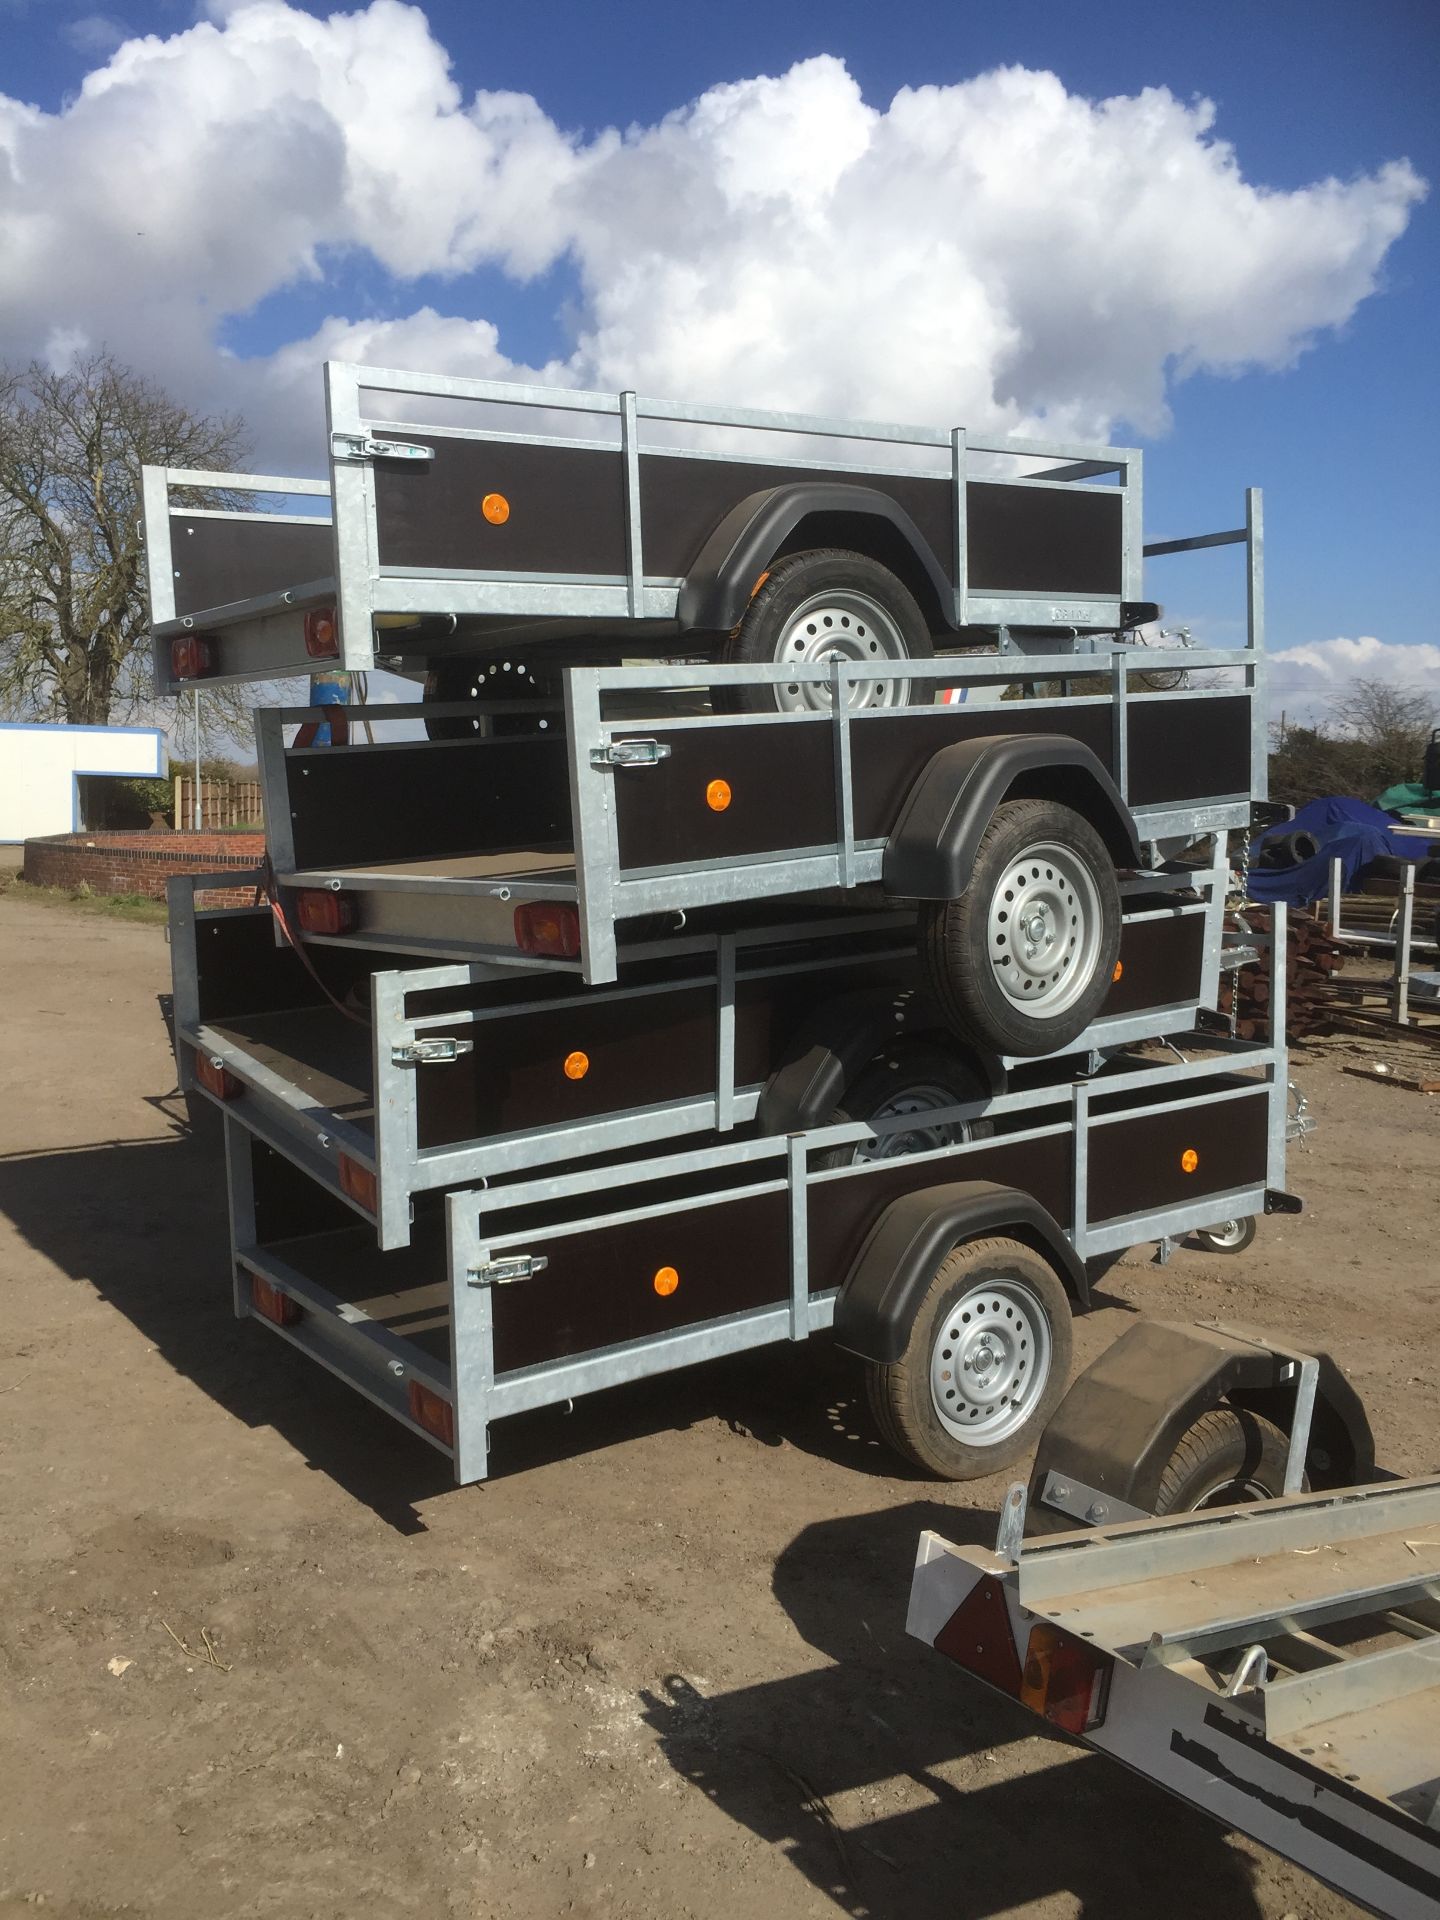 Brand New 6ft 8” trailer with drop down tail gates and hard wired lighting. Acorn Trailer, full